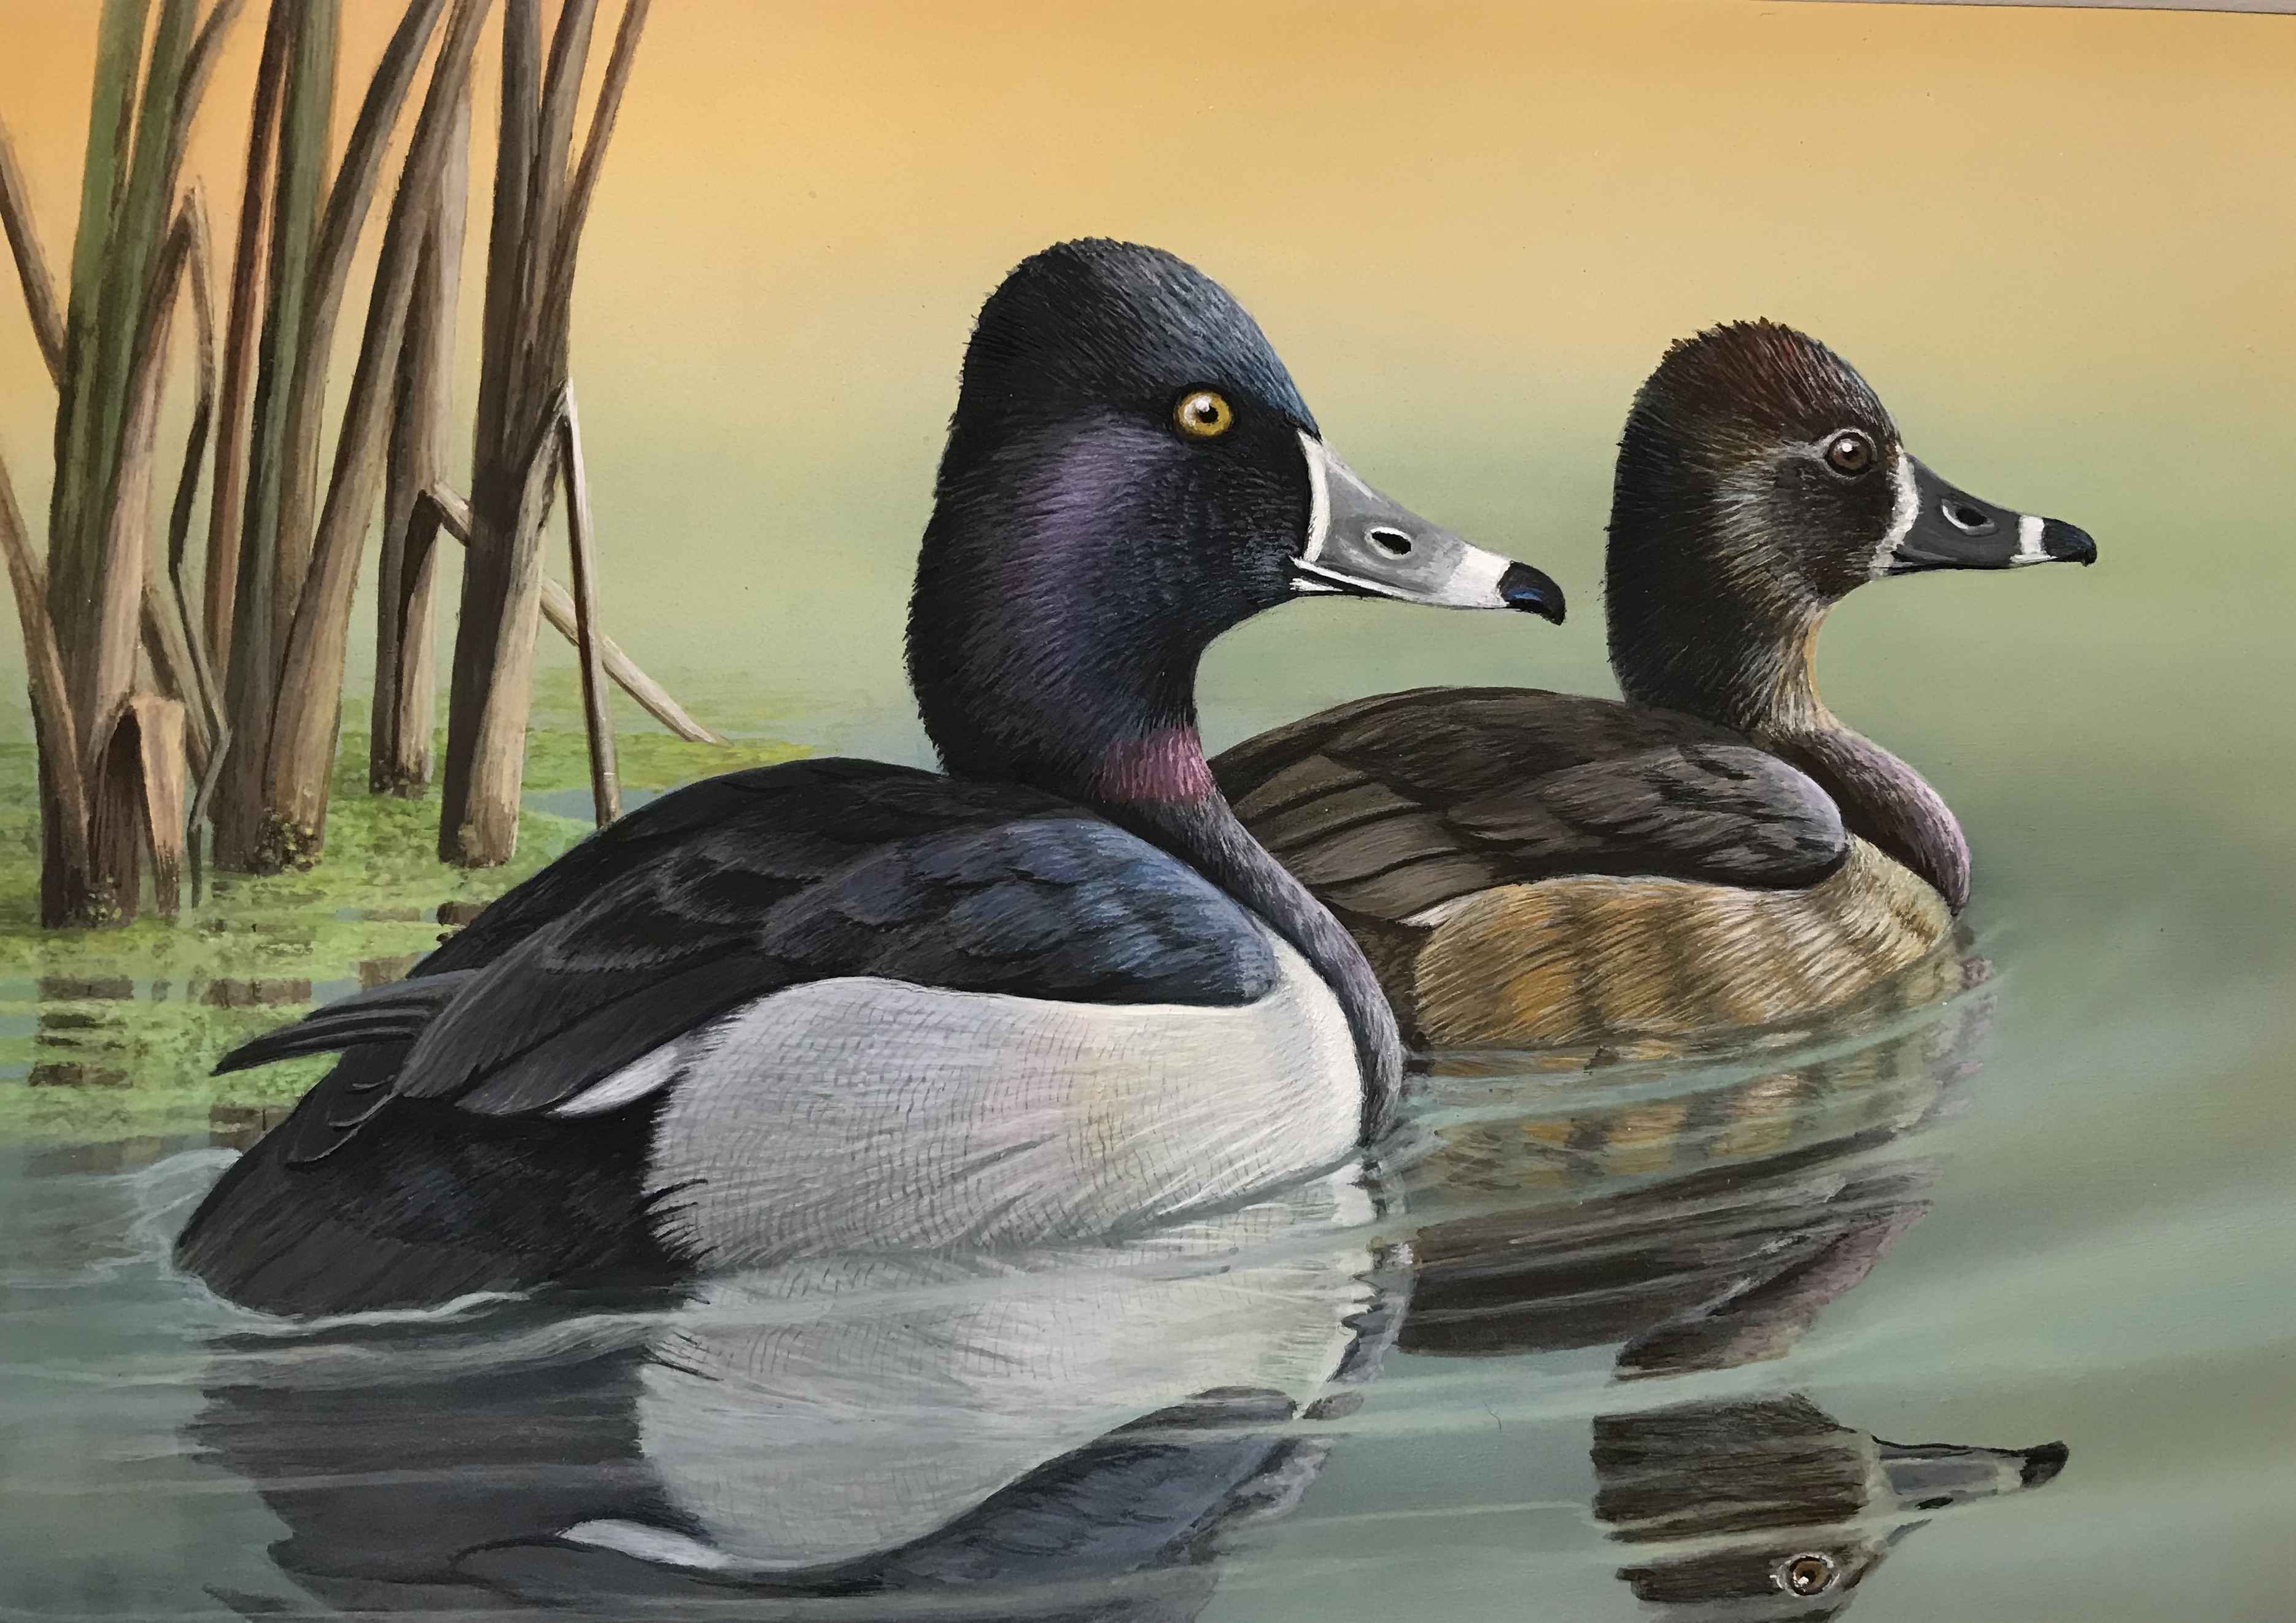 2019 Oregon Waterfowl Stamp Winner - 2nd Place